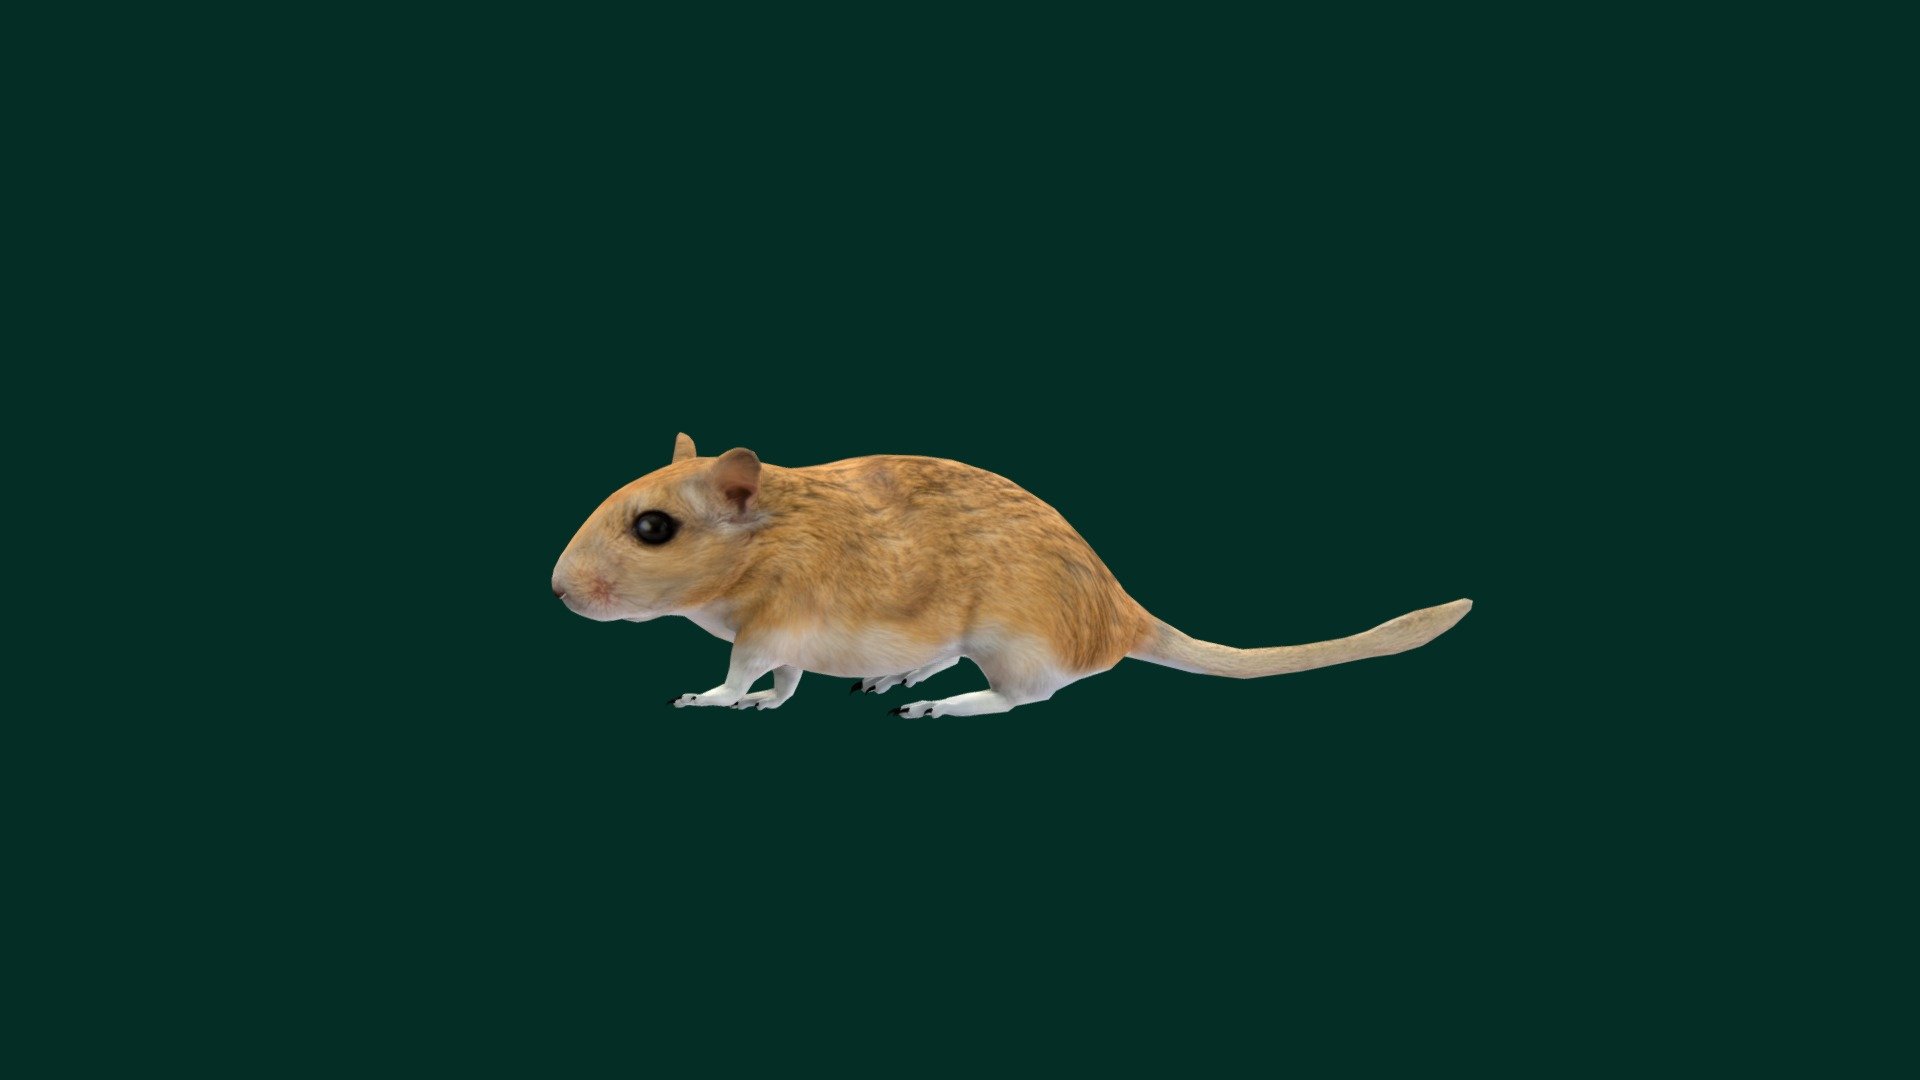 Mongolian Gerbil (Rodents) Sand Rat   

‎Gerbillinae  Meriones unguiculatus Mammal House Pet ( Mongolian jird  )

1 Draw Calls

GameReady 

9 Animations

4K PBR Textures Material

Unreal FBX

Unity FBX  

Blend File 

USDZ File (AR Ready). Real Scale Dimension

Textures Files

GLB File

Gltf File ( Spark AR, Lens Studio(SnapChat) , Effector(Tiktok) , Spline, Play Canvas ) Compatible



Triangles : 7412

Vertices  : 3727

Faces     : 3832 

Edges     : 7556

Diffuse , Metallic, Roughness , Normal Map ,Specular Map,AO
The Mongolian gerbil or Mongolian jird is a small rodent belonging to the subfamily Gerbillinae. Their body size is typically 110–135 mm, with a 95–120 mm tail, and body weight 60–130 g, with adult males larger than females. The animal is used in science and research or kept as a small house pet. Wikipedia
Collective noun: horde Wikimedia Foundation
Term for young: pup Wikimedia Foundation
Gestation period: 24 – 26 days (Female, Sexually mature) - Mongolian Gerbil Rat (Lowpoly) - 3D model by Nyilonelycompany 3d model